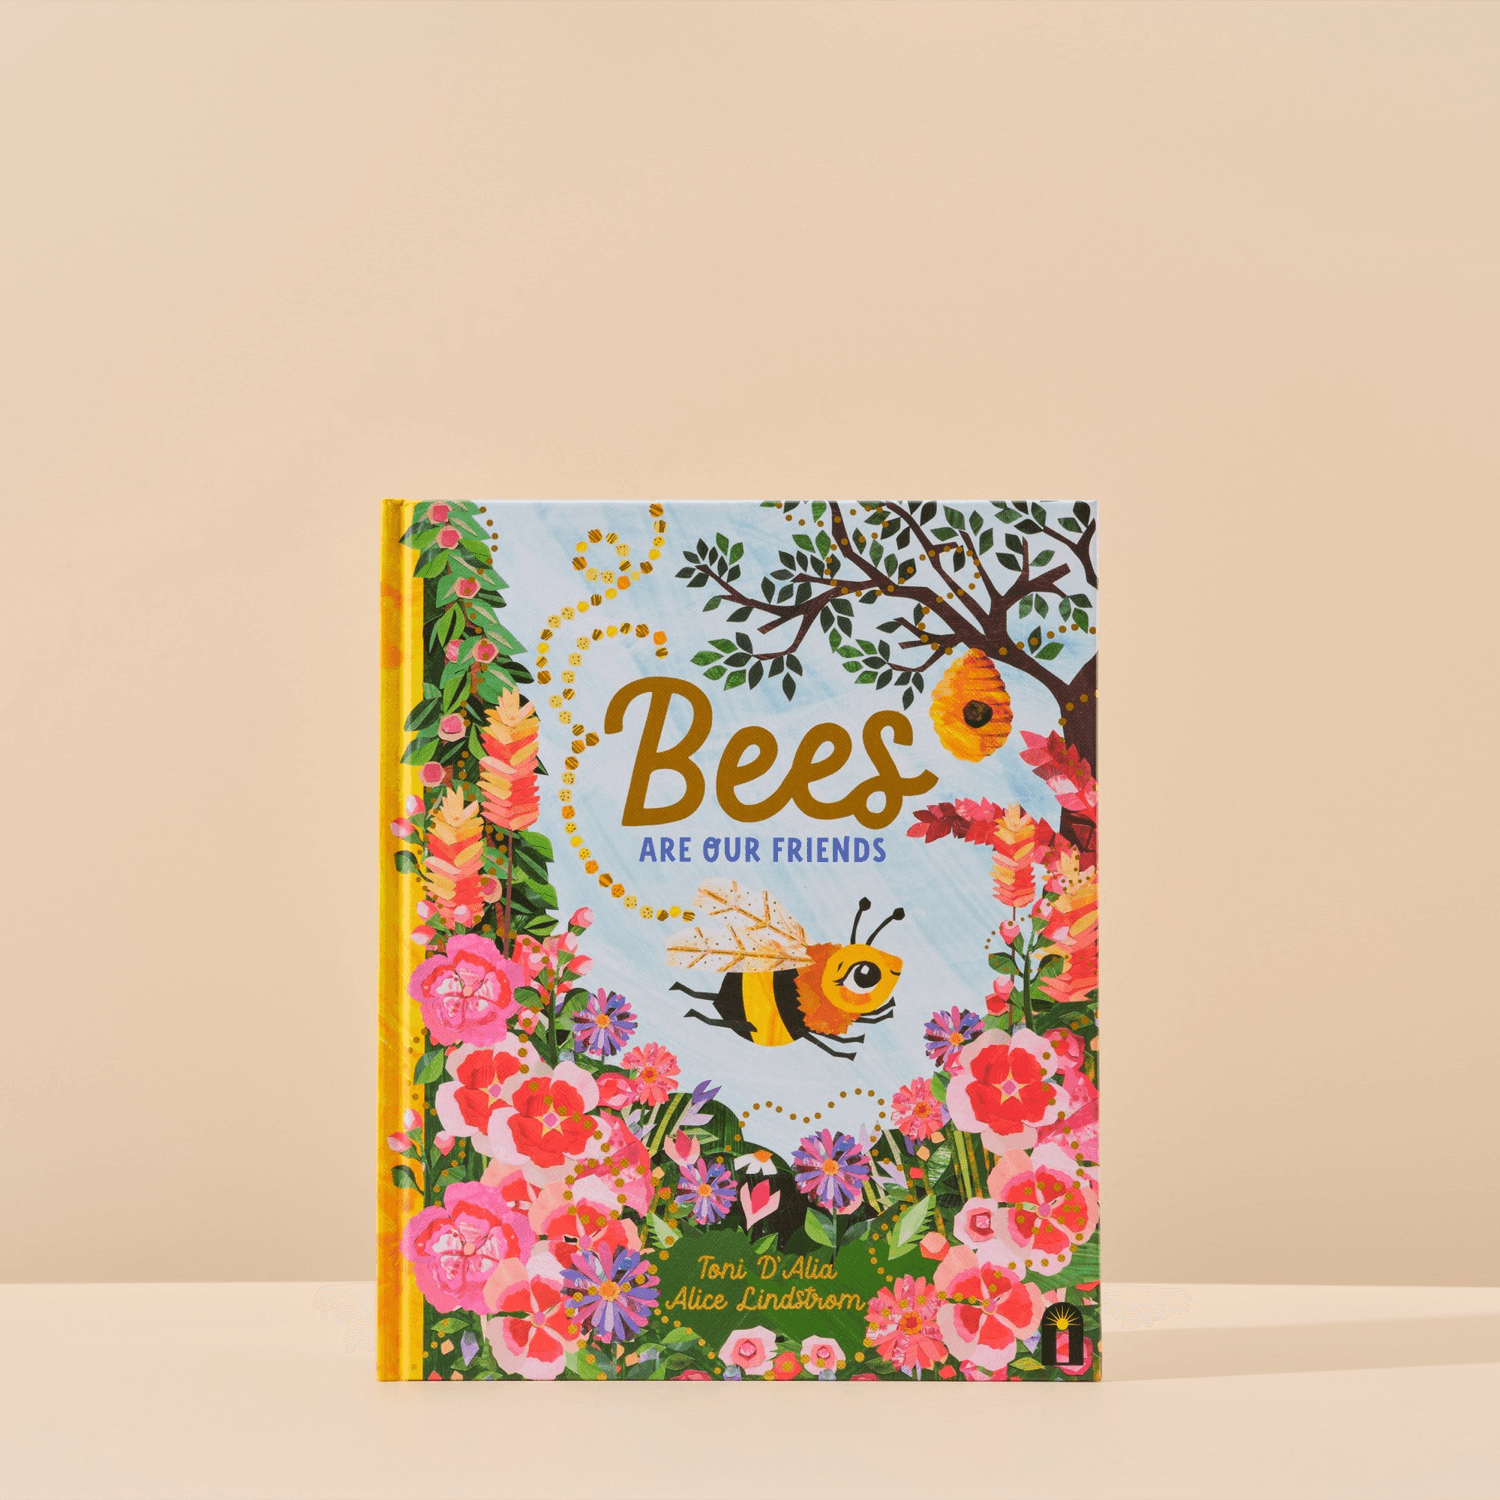 Bee's are our friends book cover written by Toni D'Alia